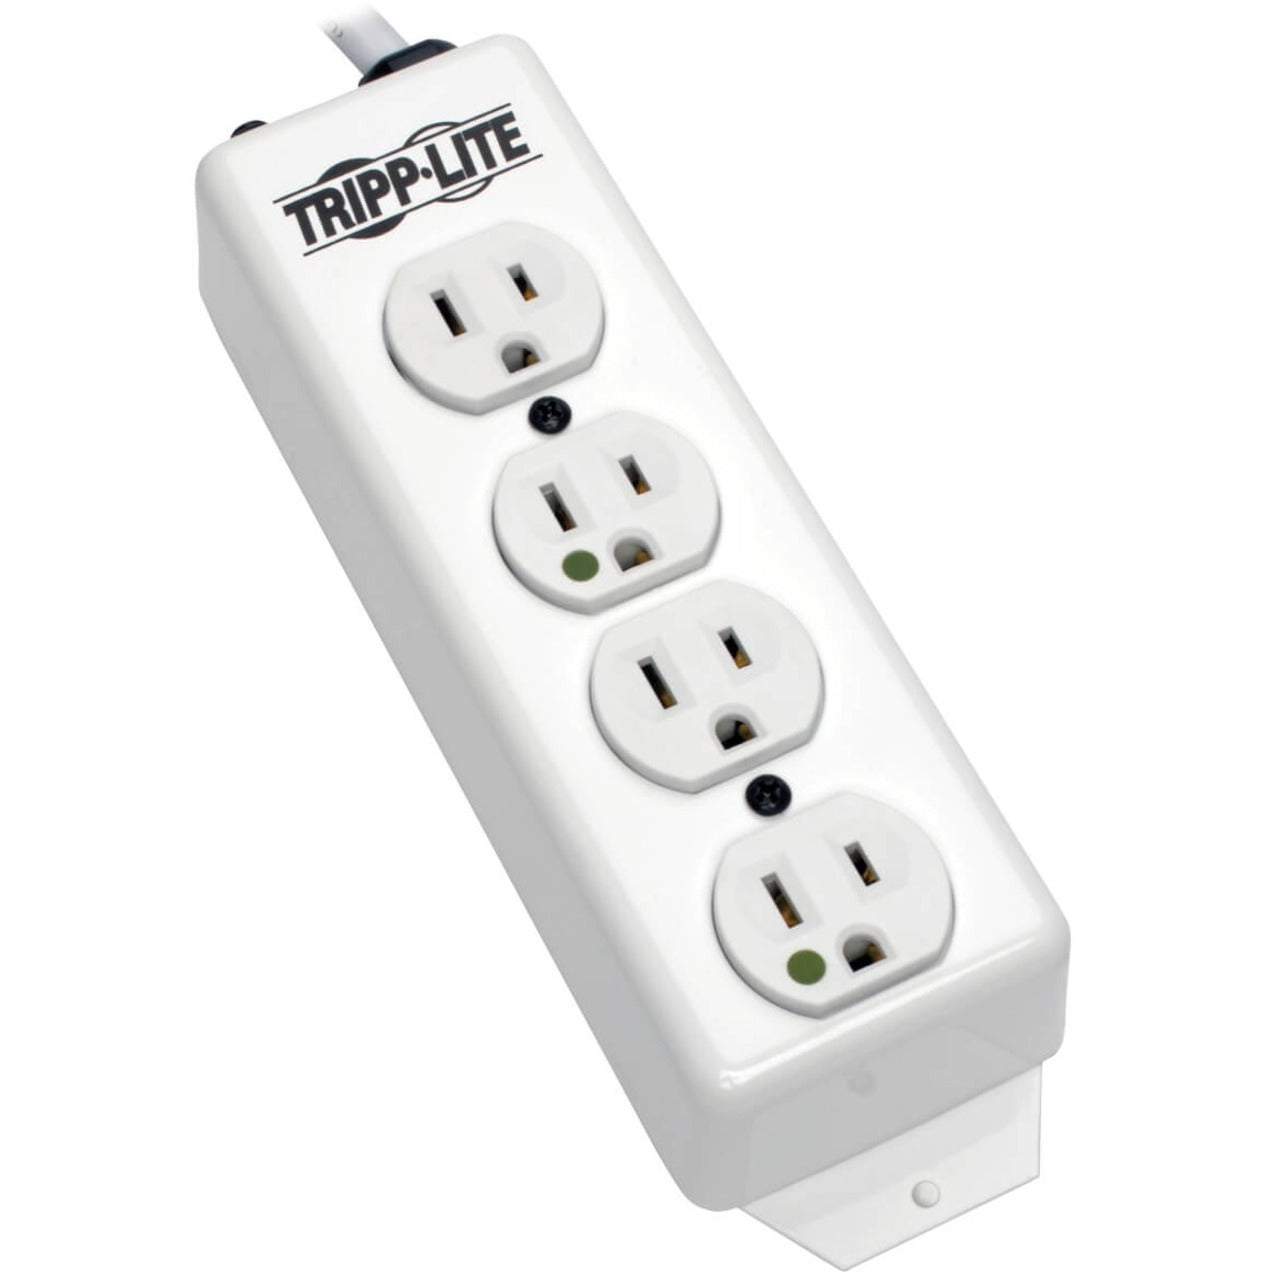 Tripp Lite PS-415-HG Power Strip 120V AC, 6 Outlet with Hospital Grade Plug and 15 ft. Cord